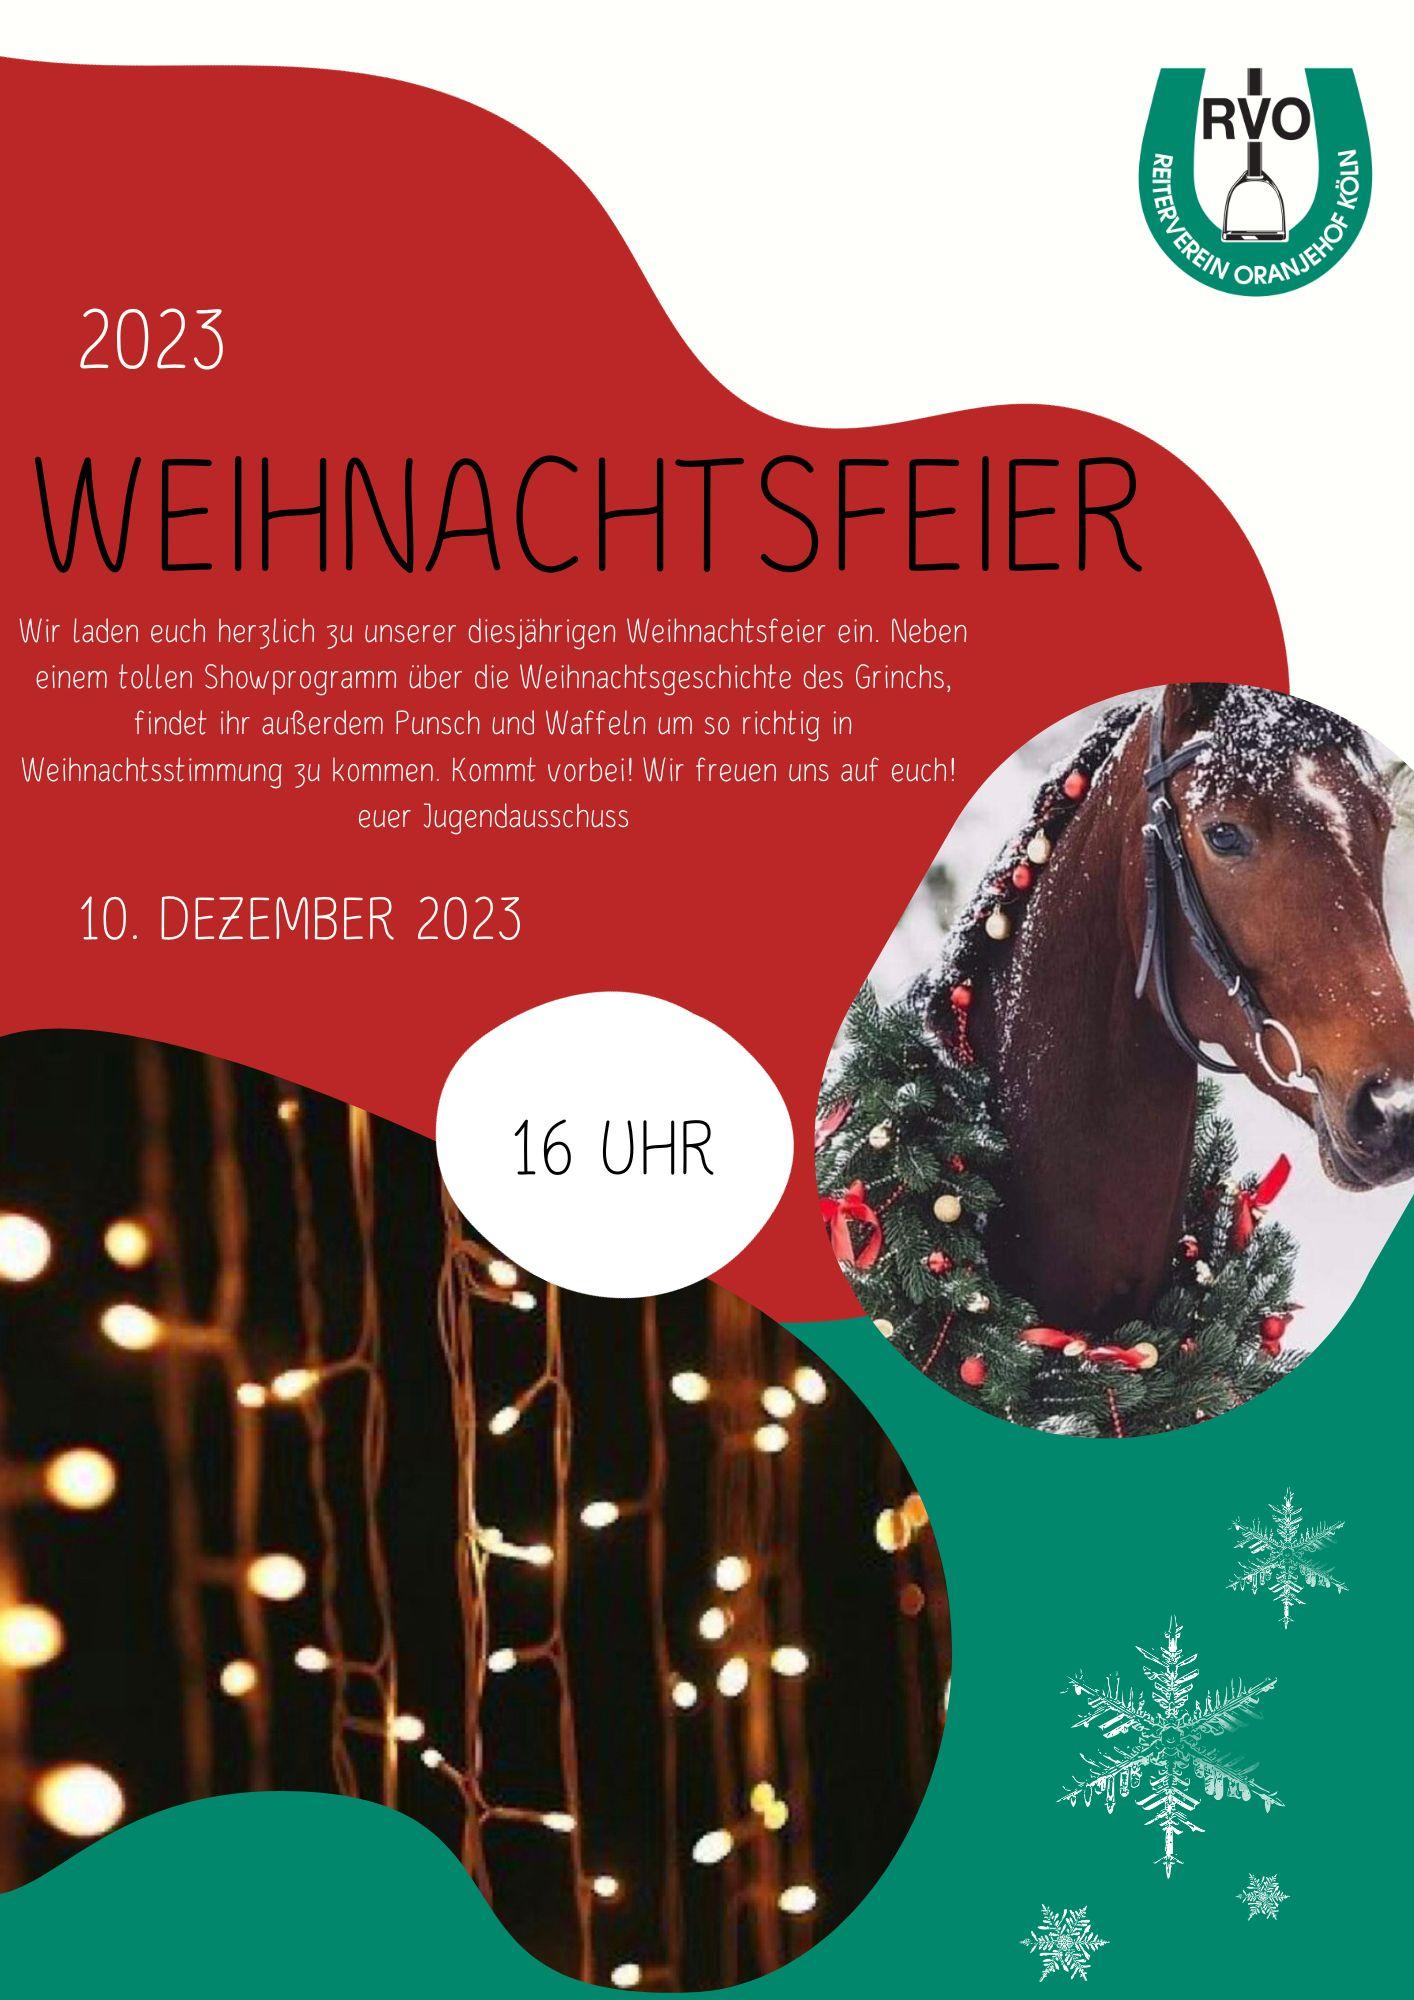 You are currently viewing Weihnachtsfeier 2023